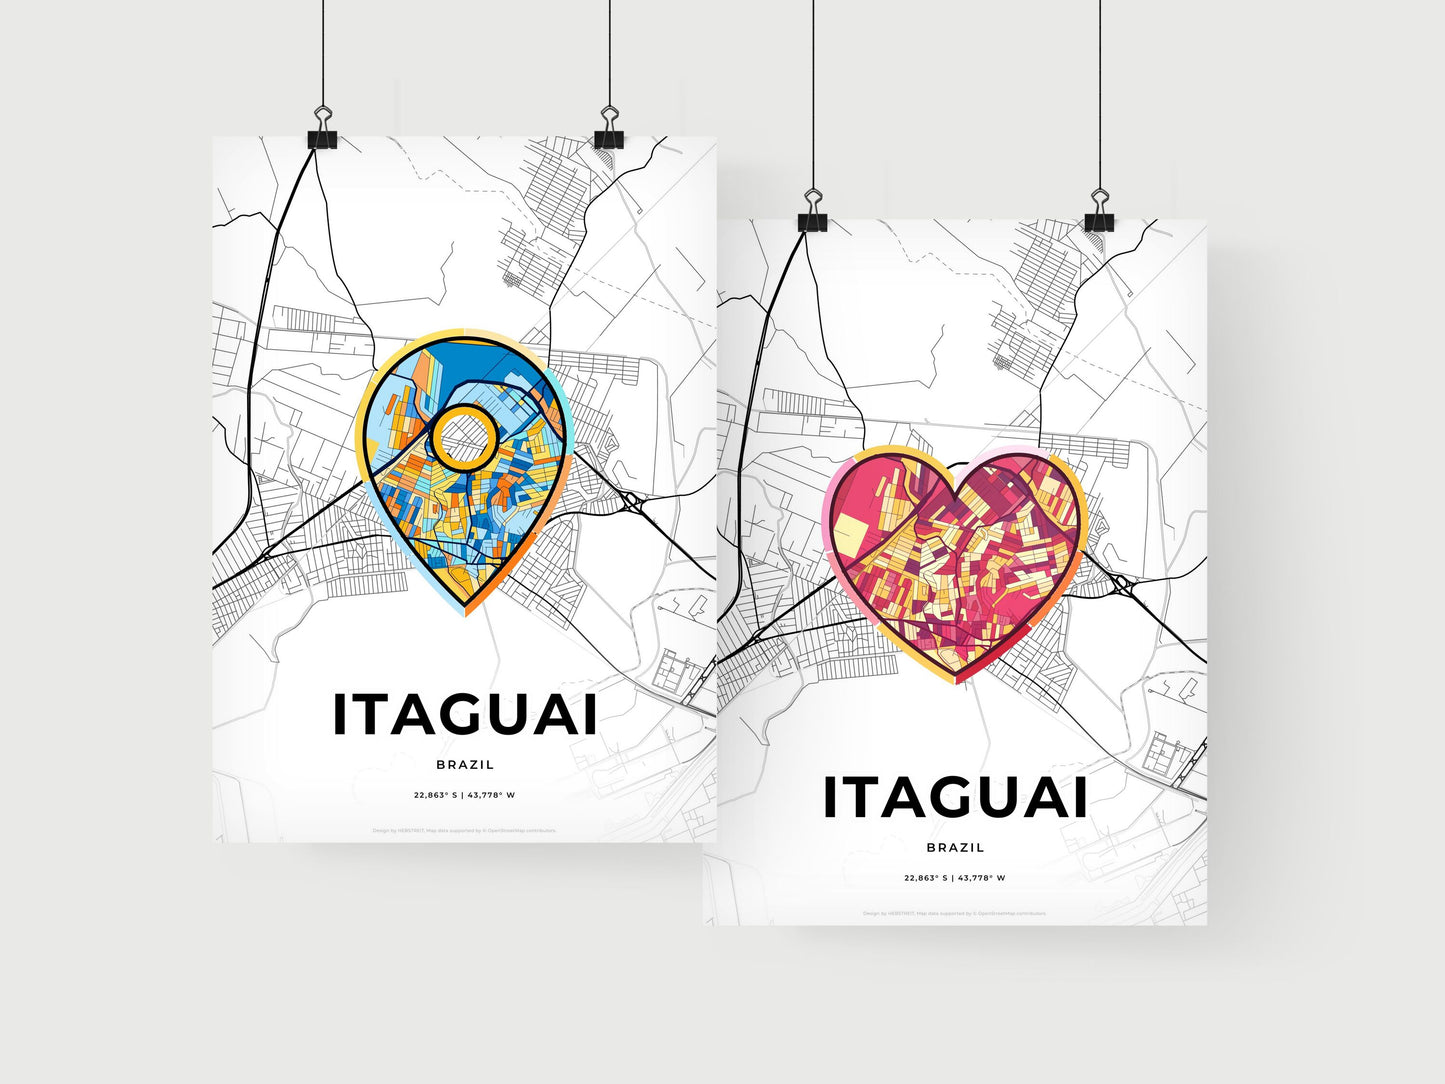 ITAGUAI BRAZIL minimal art map with a colorful icon. Where it all began, Couple map gift.